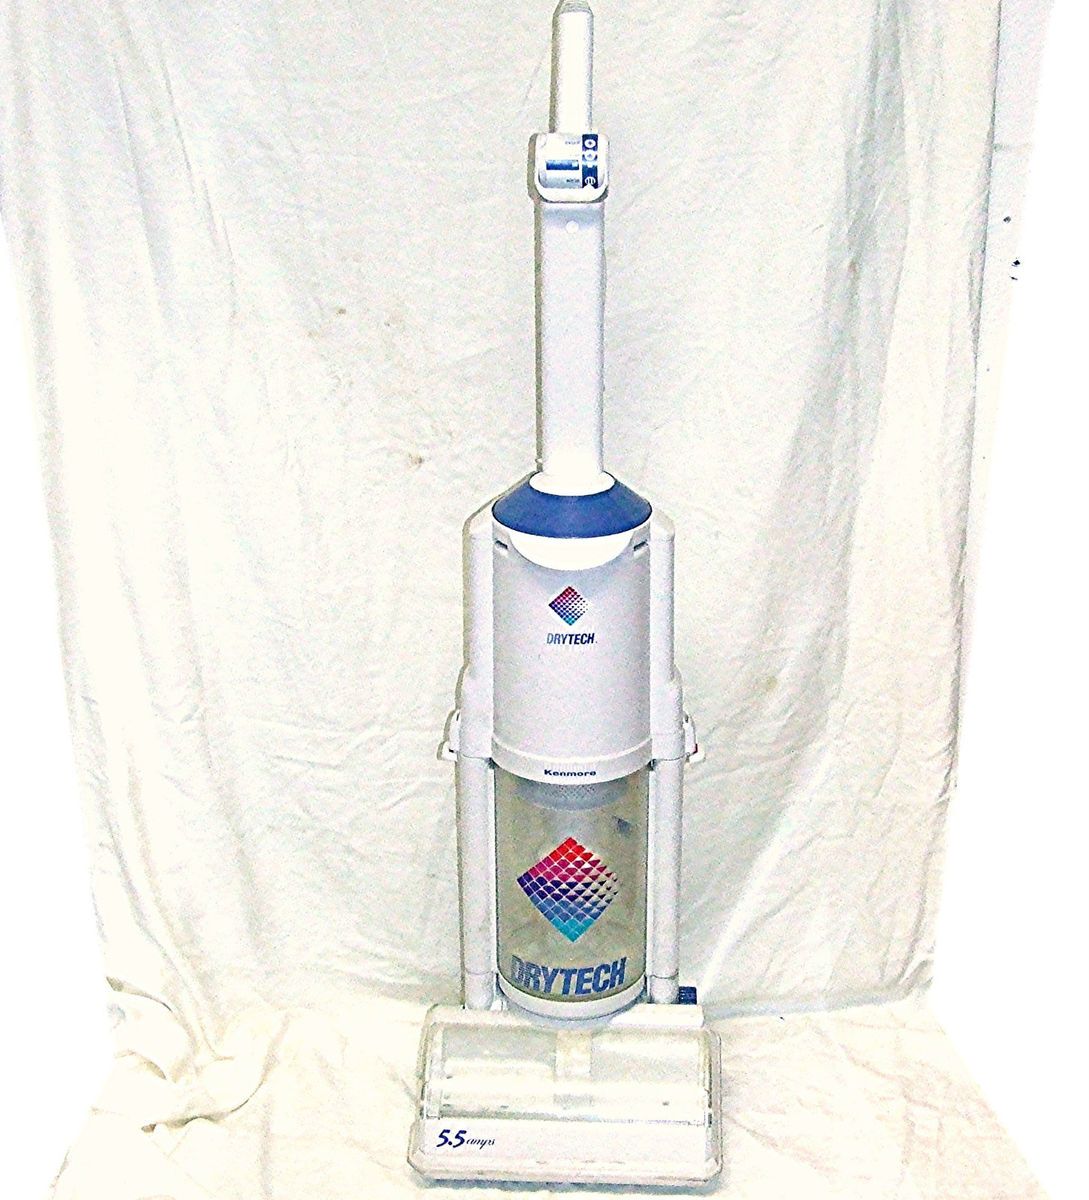  Capture Commercial Cleaner Drytech Dry Carpet Cleaning Machine